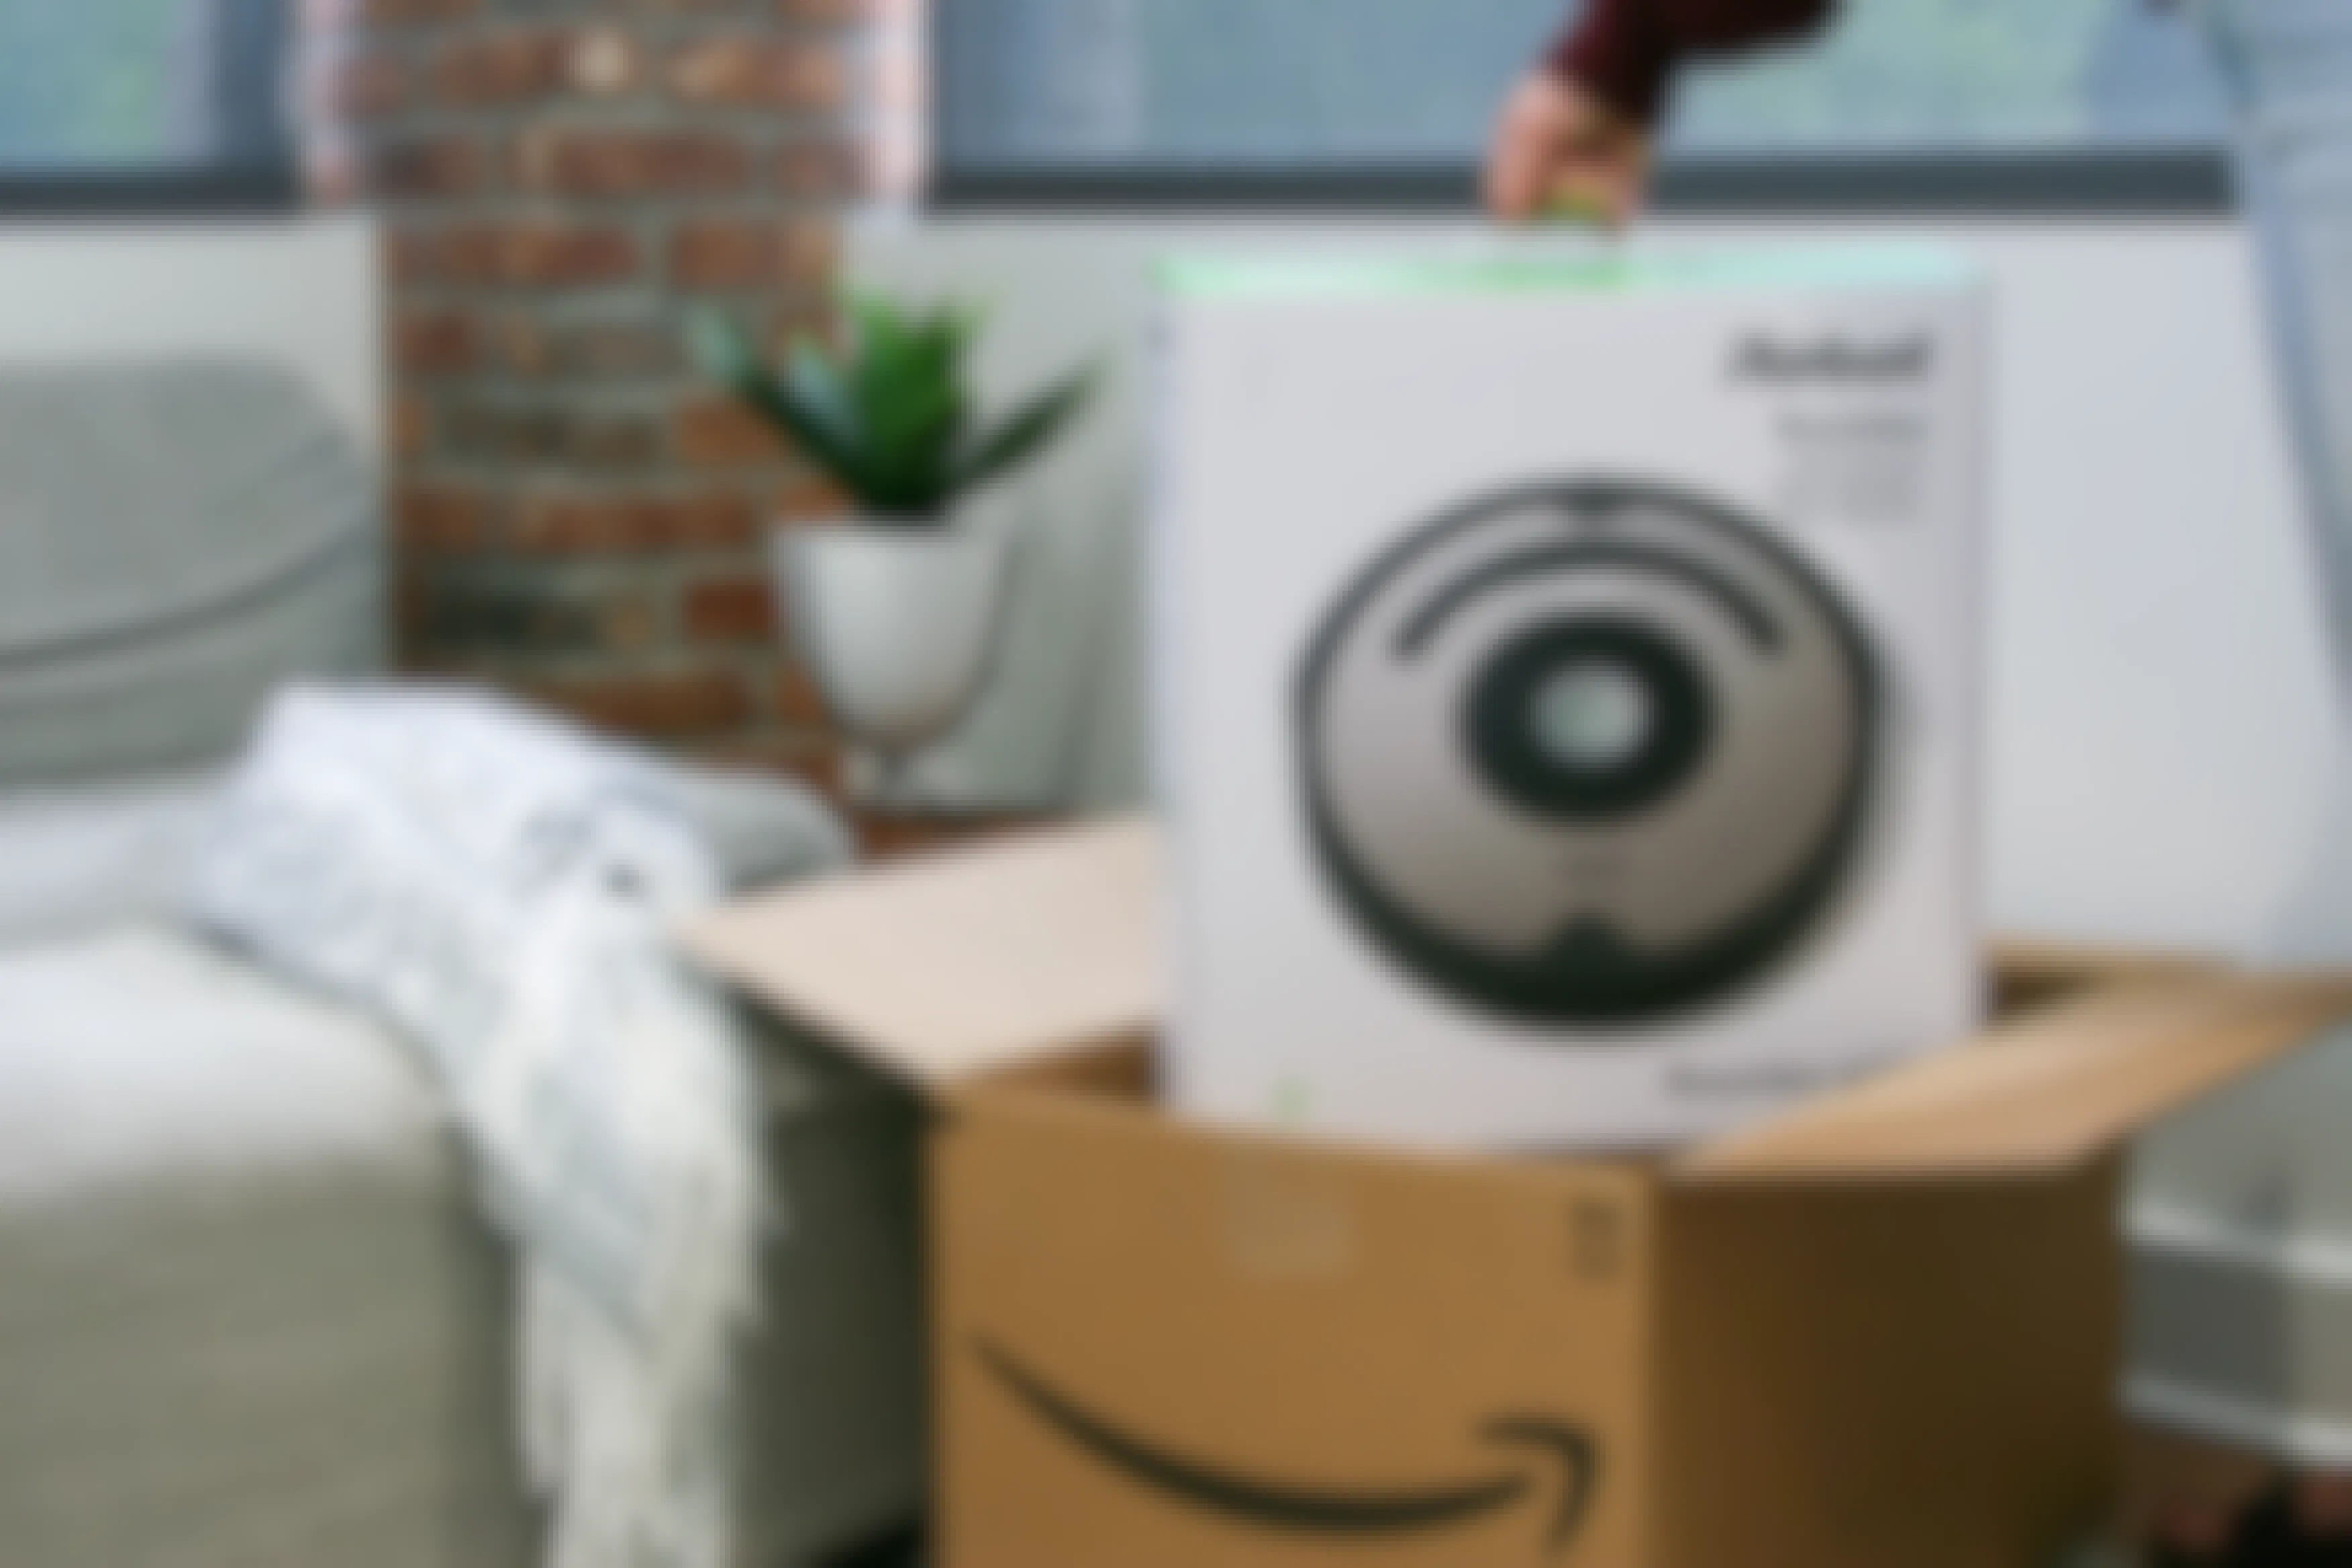 Someone taking an iRobot Roomba out of an Amazon box